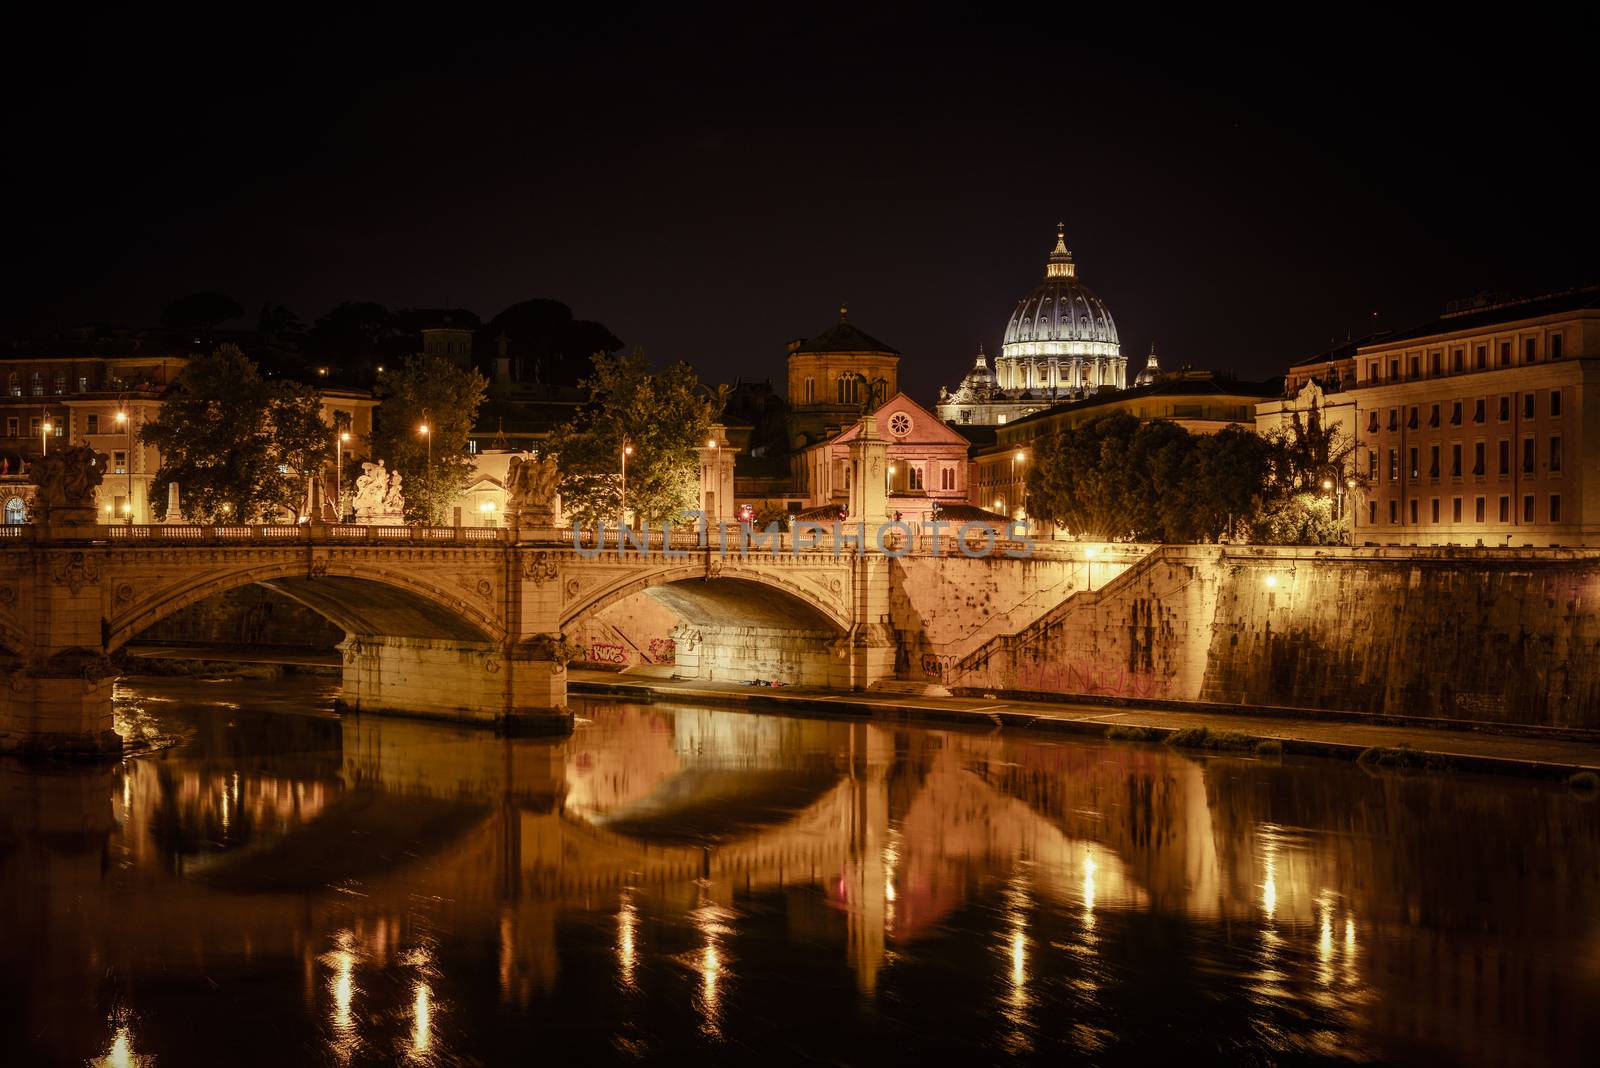 Basilica of San Pietro at night overlooking the Tevere river and surrounding historical landmarks of Rome.